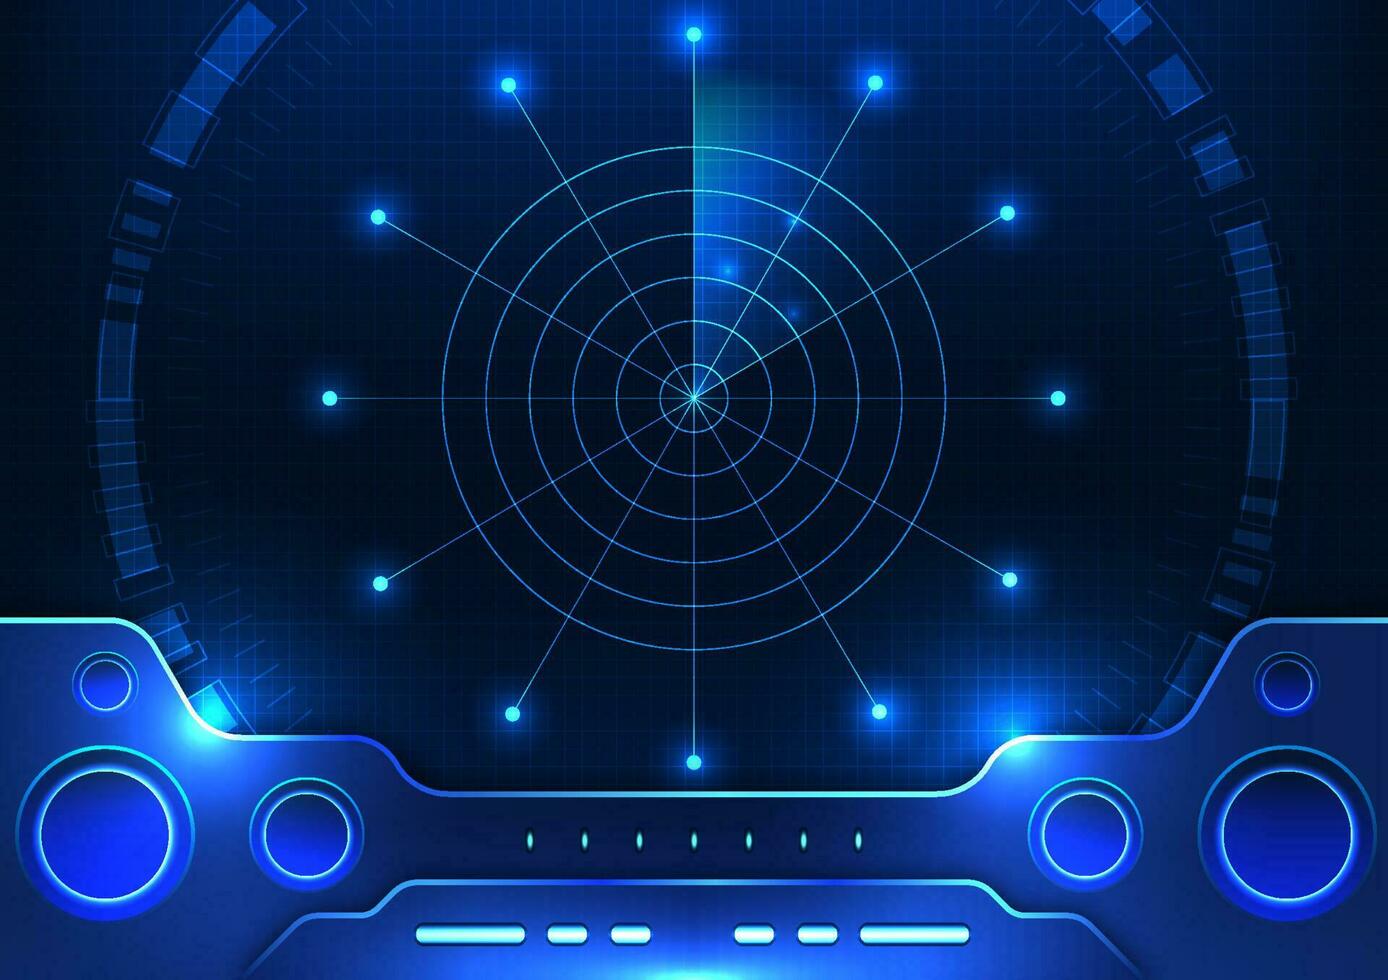 Foreign matter detection radar technology control screen background It is a screen suitable for using modern technology, using it as a poster or background. Emphasize the use of dark blue tones. vector